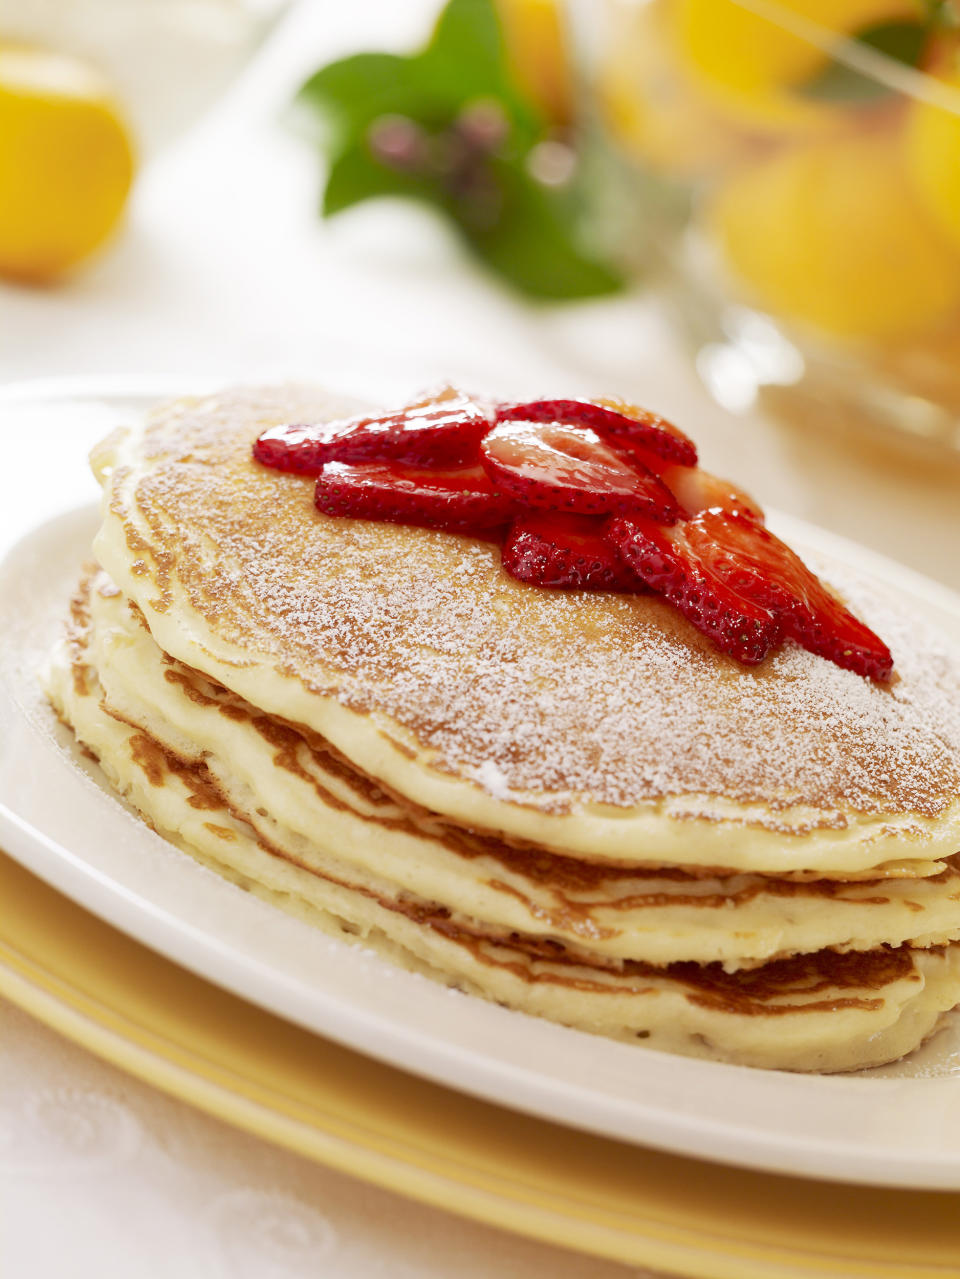 Lemon ricotta pancakes are a nice sweet treat for mom on her special day. (Cheesecake Factory)